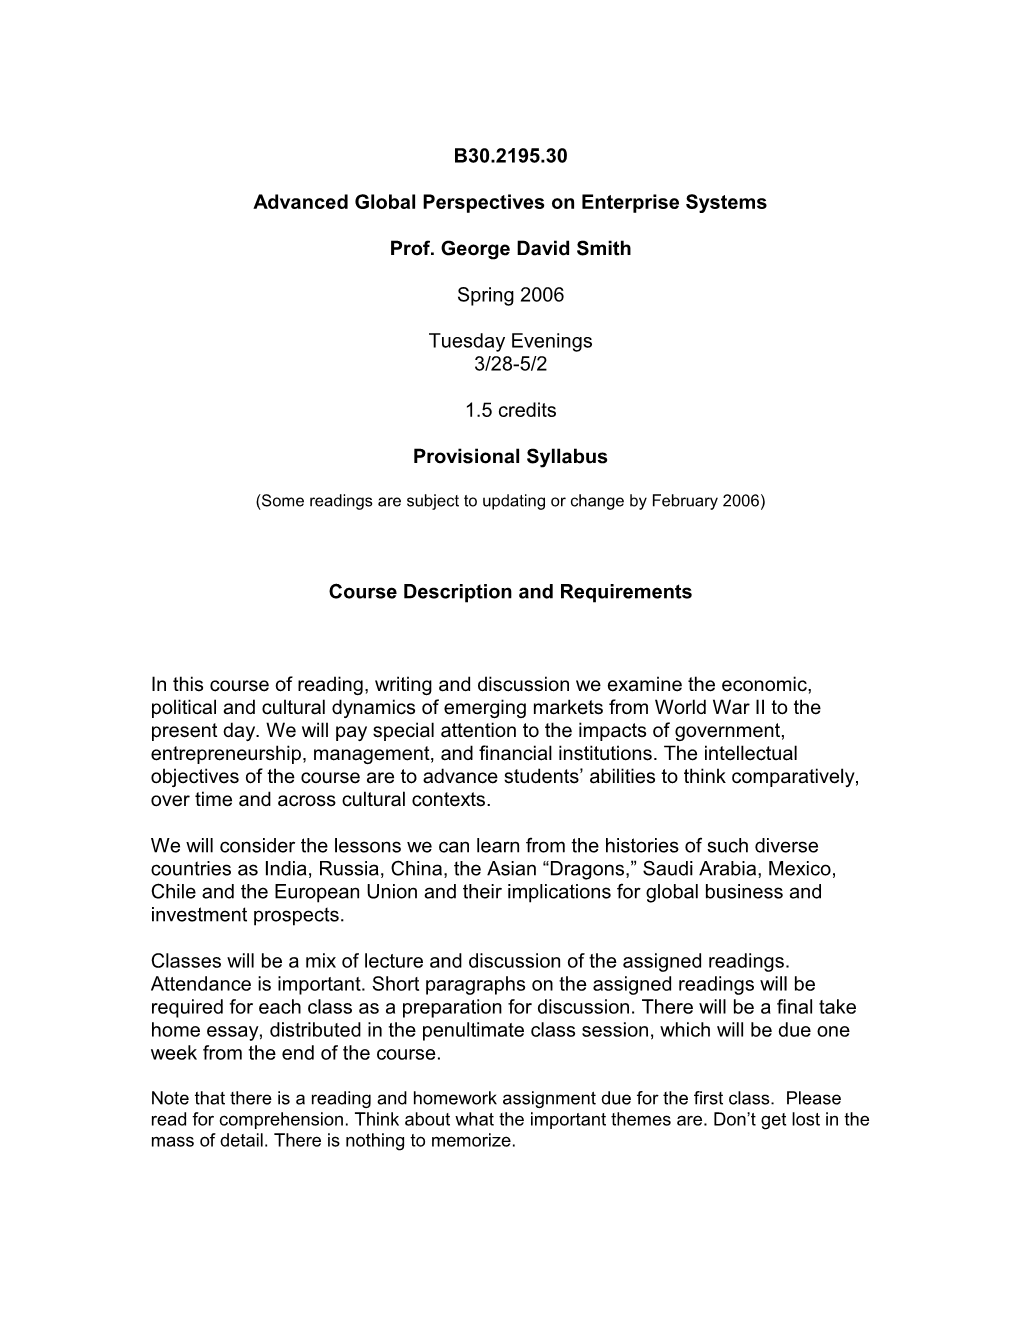 Advanced Global Perspectives on Enterprise Systems